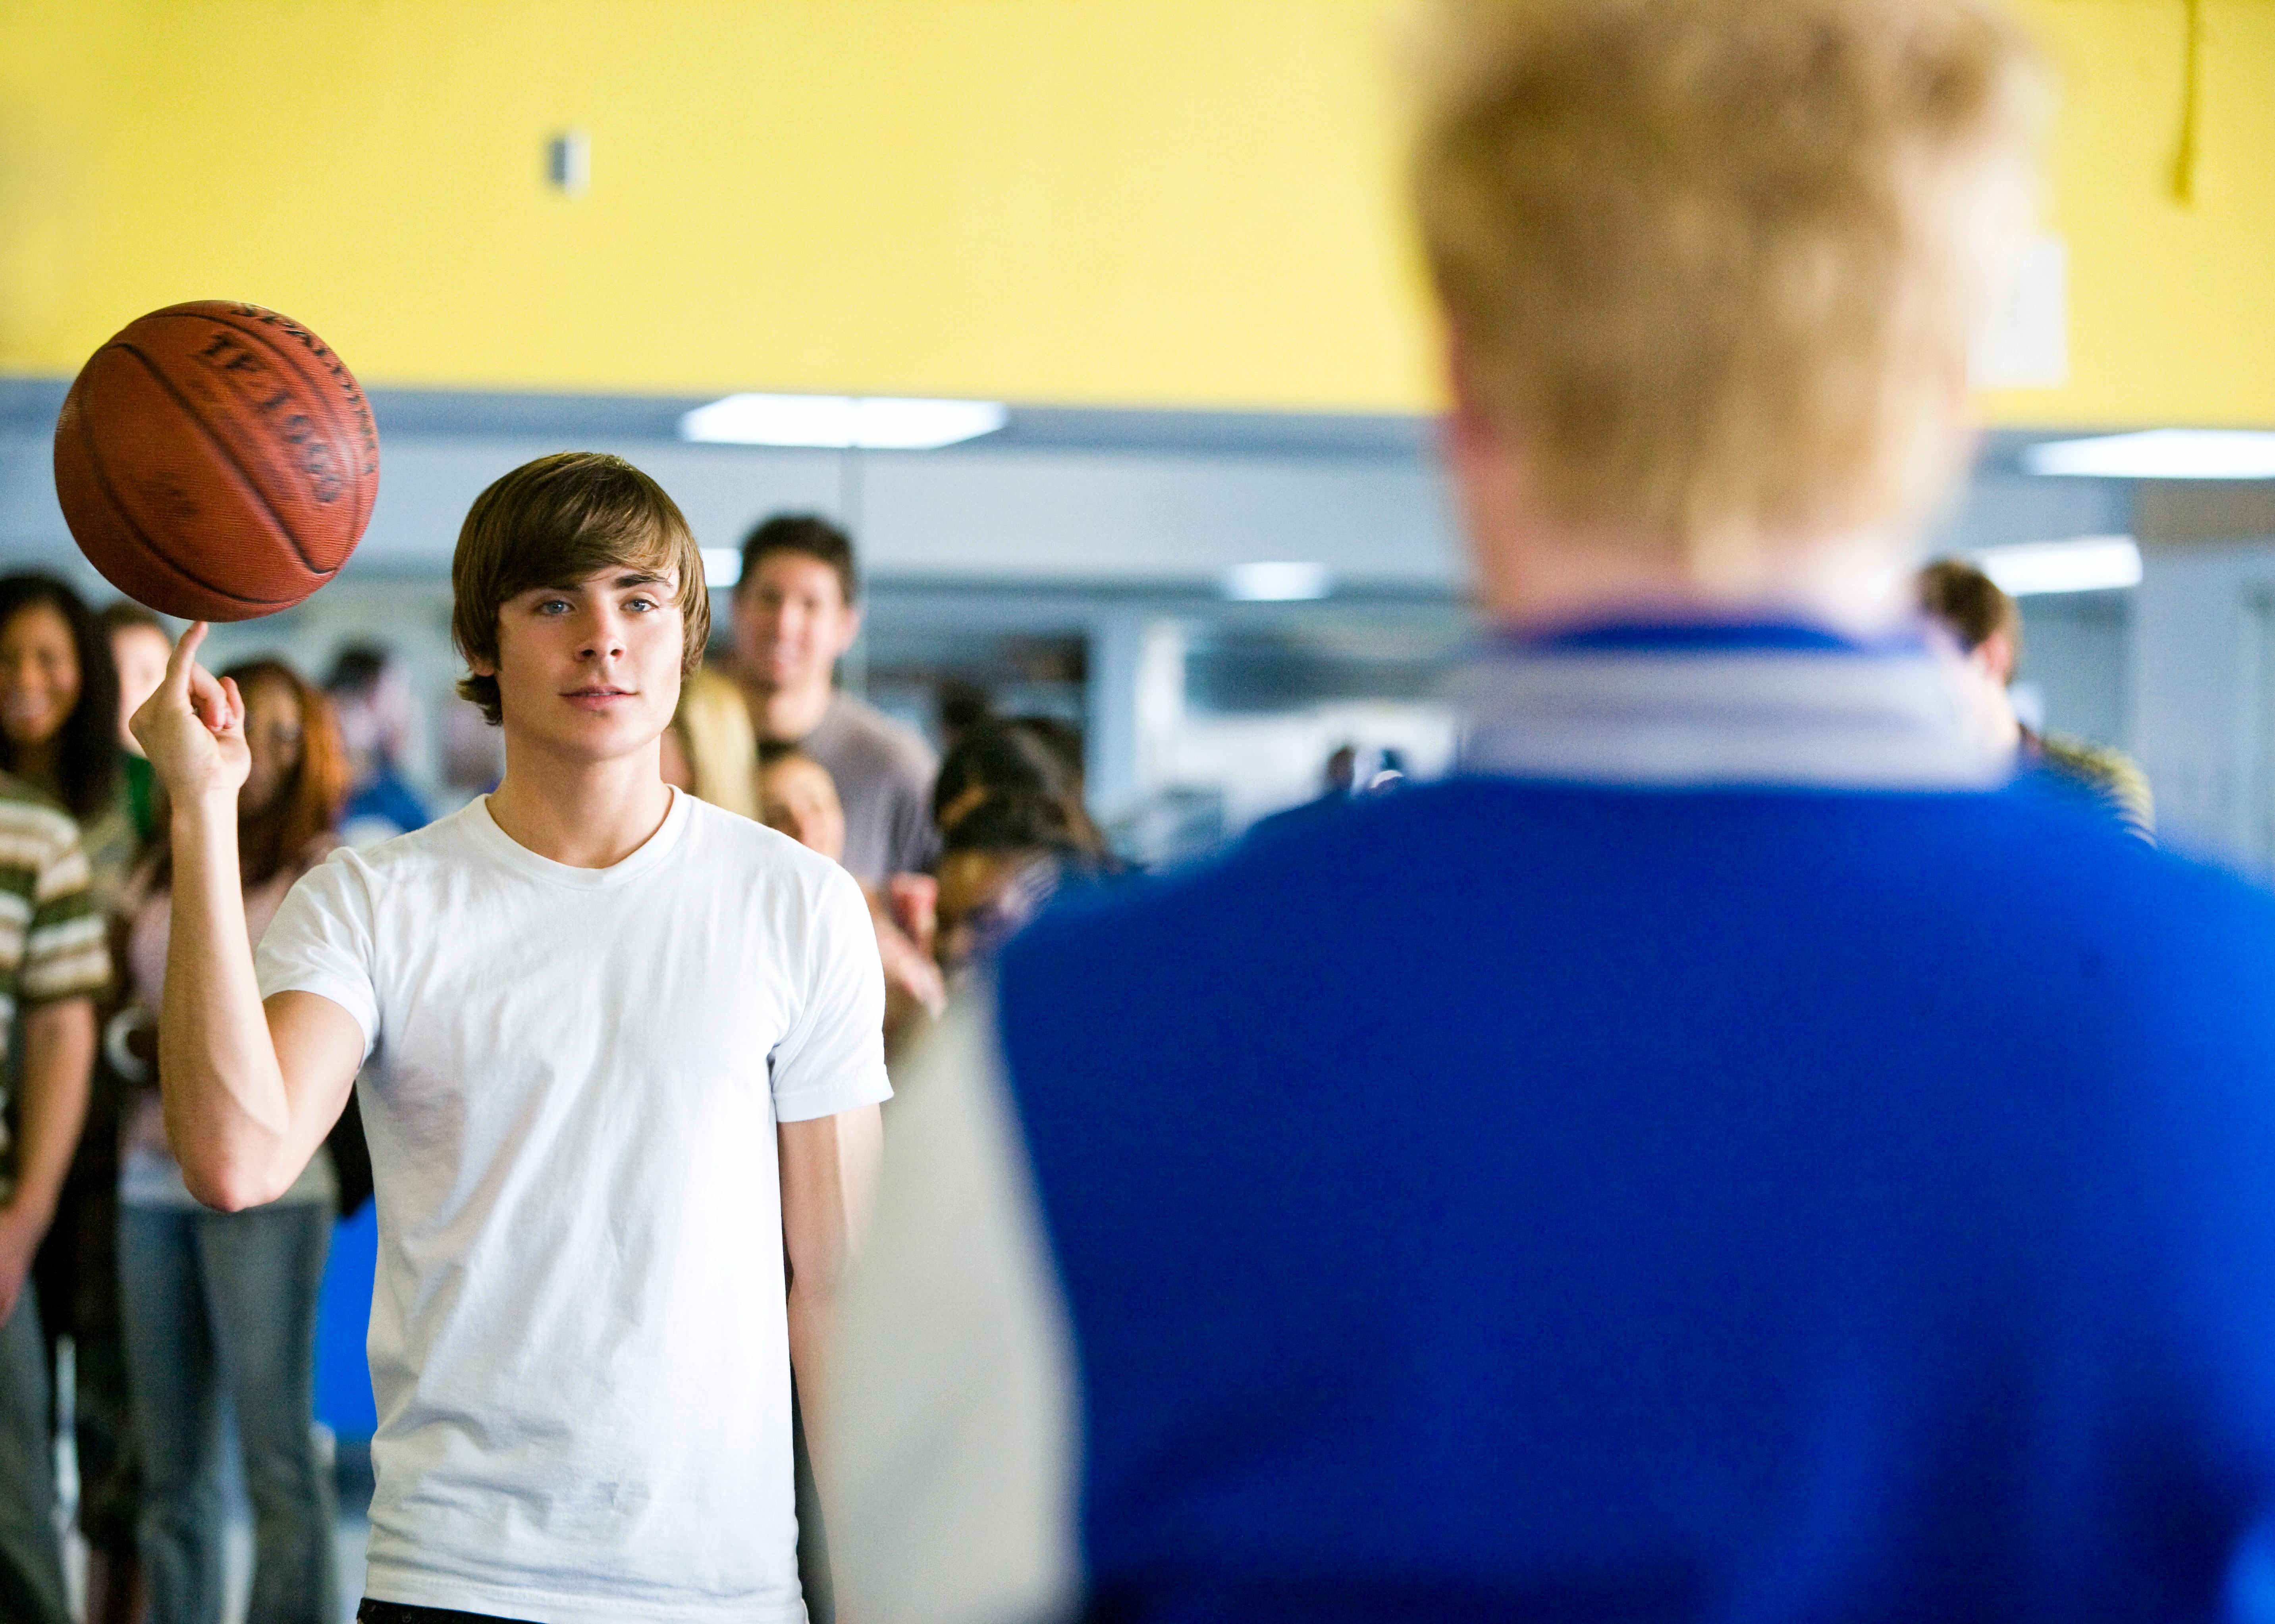 Zac Efron stars as Mike O' Donnell at 17 in New Line Cinema's 17 Again (2009). Photo credit by Chuck Zlotnick.